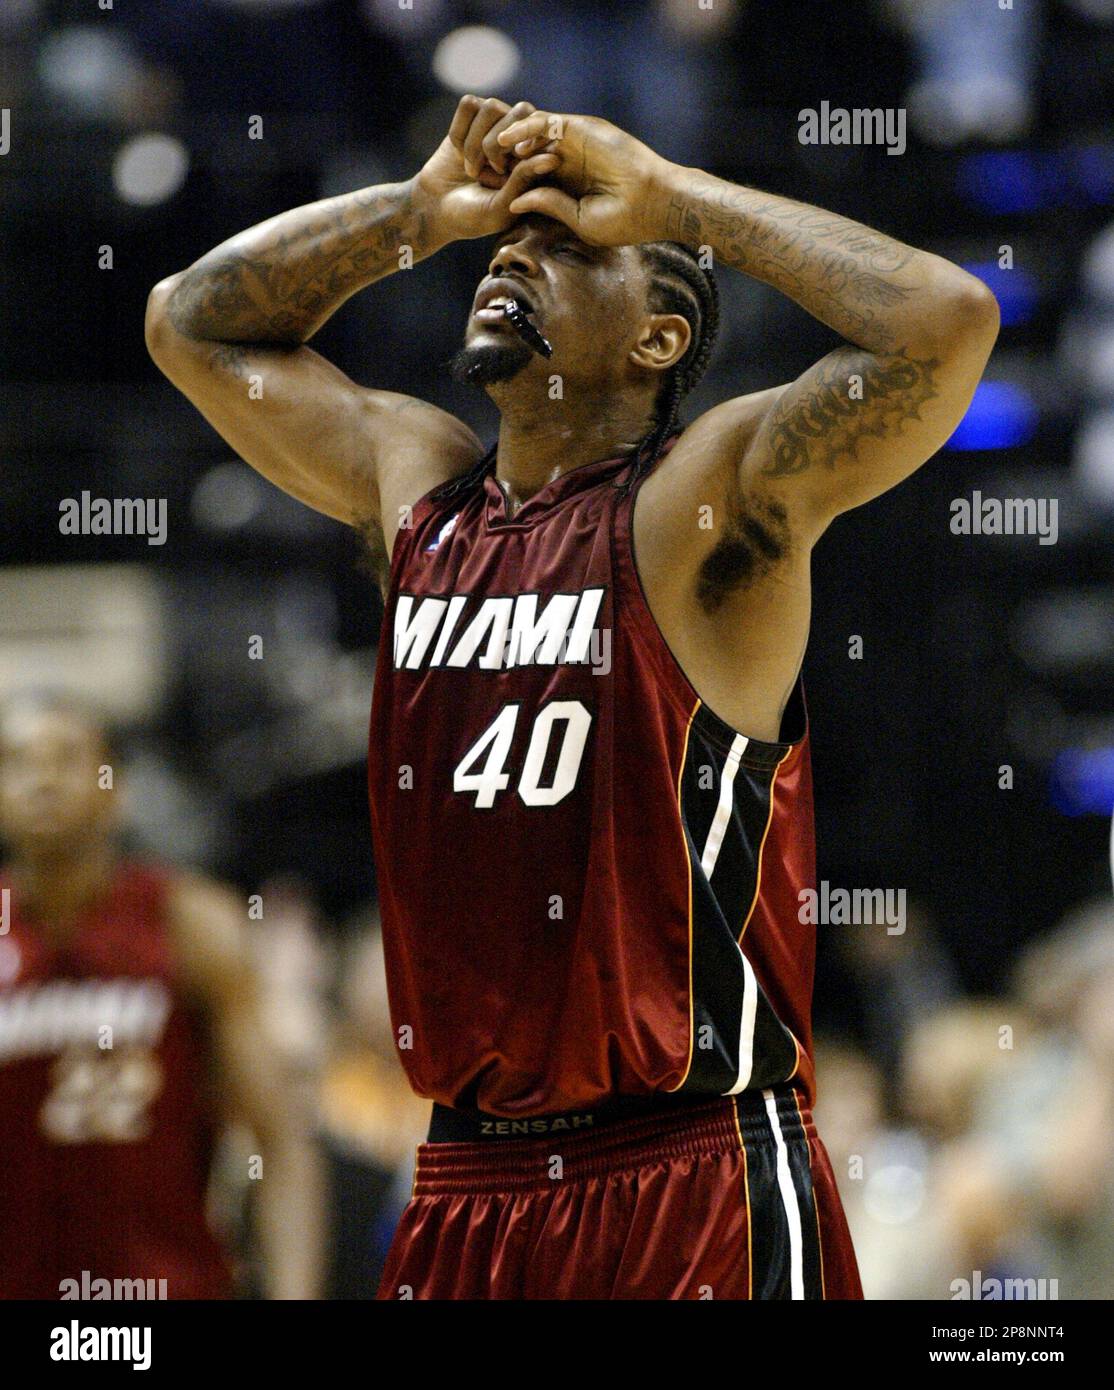 Heat's Udonis Haslem working on and off the court in Miami